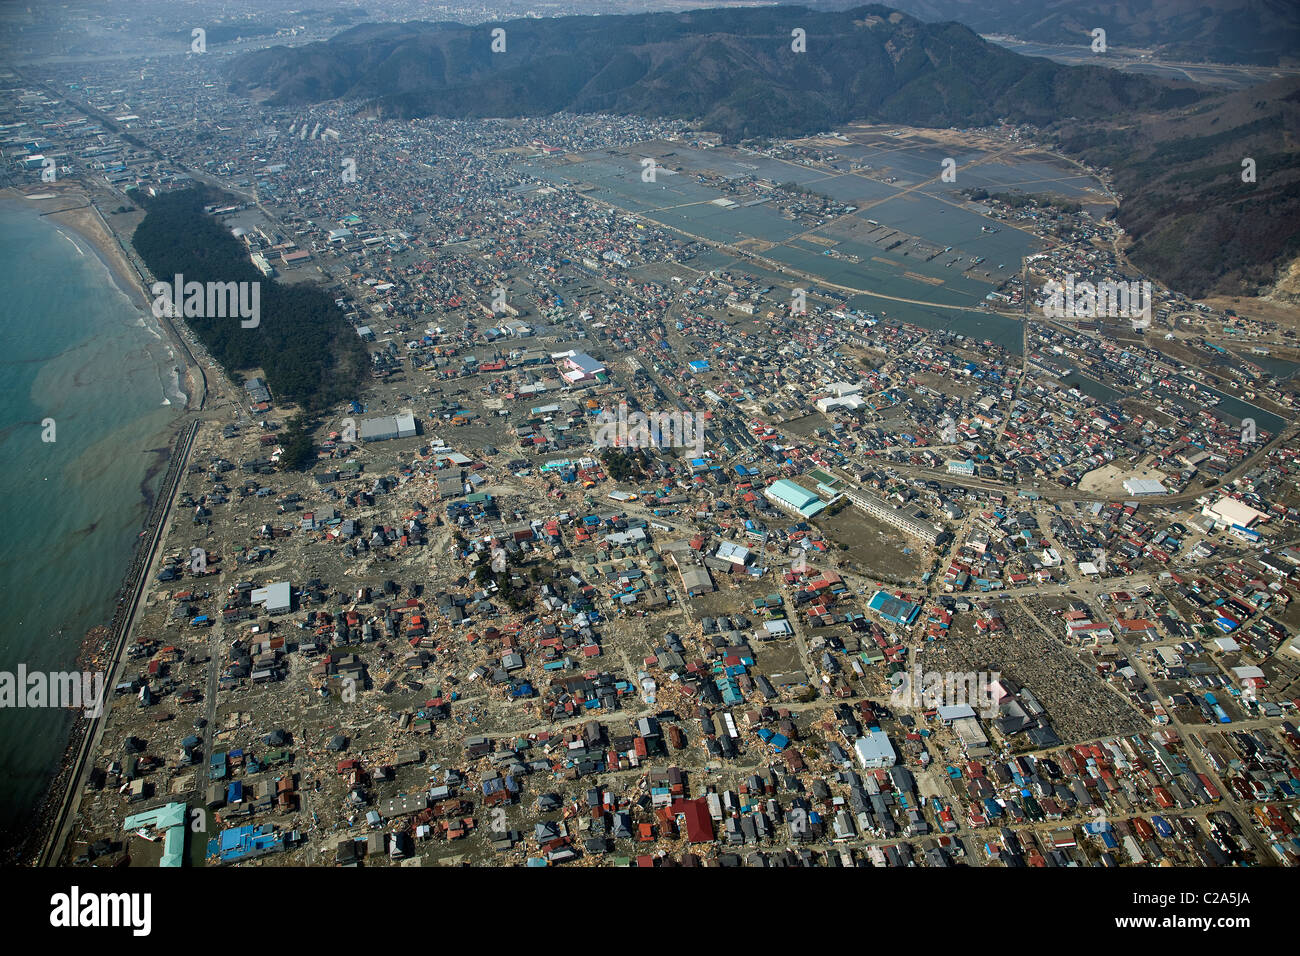 Aerial view of damage to Ishinomaki, Miyagi Prefecture after a 9. 0 magnitude earthquake and subsequent tsunami devastated the Stock Photo